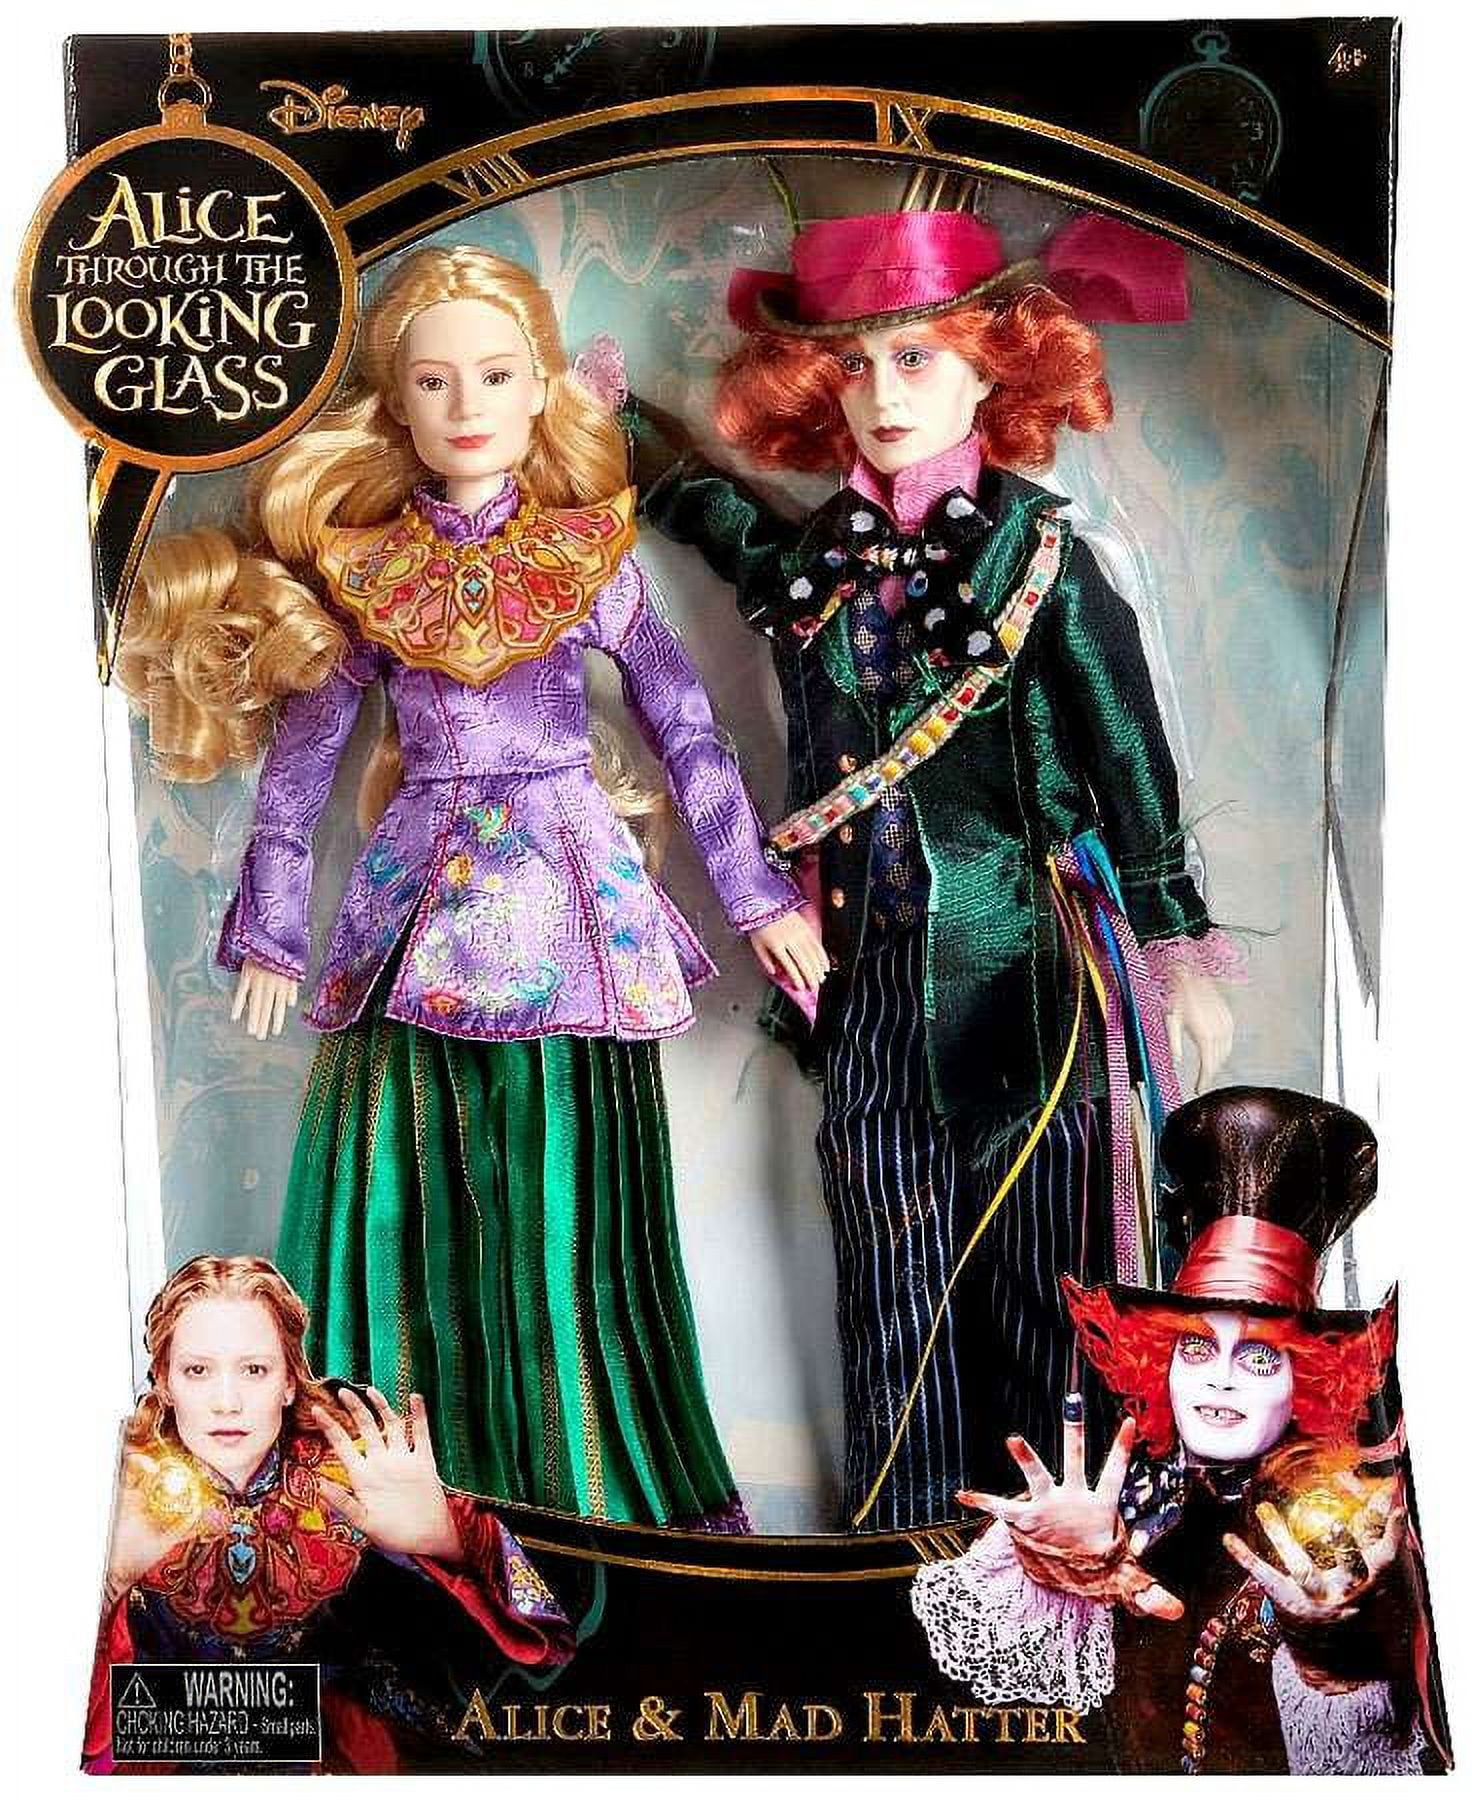 3 Disney Alice in Wonderland Through The Looking Glass Dolls for